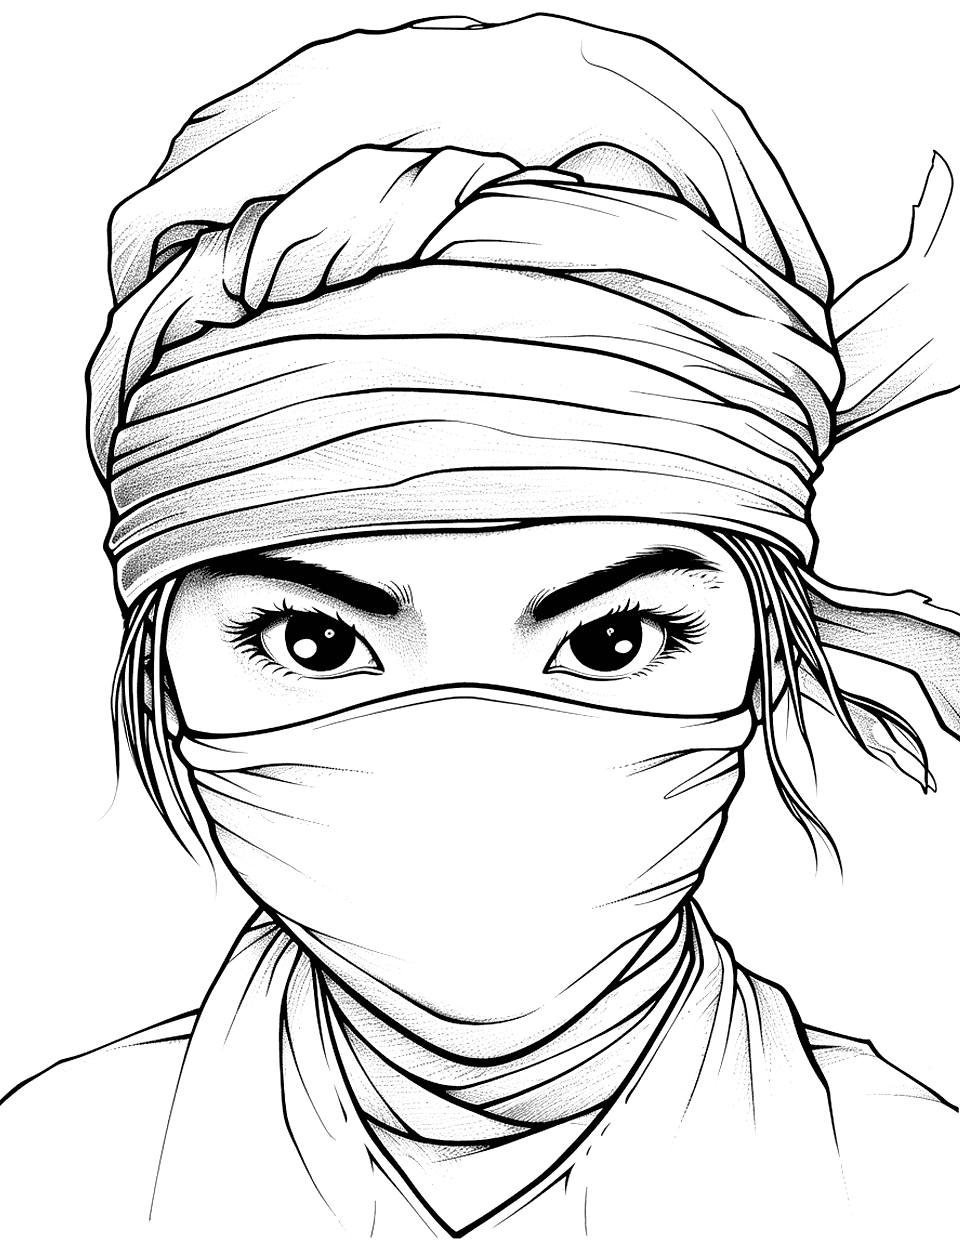 Realistic Ninja Gaze Coloring Page - A realistic depiction of a ninja’s intense gaze, focusing on the mission.